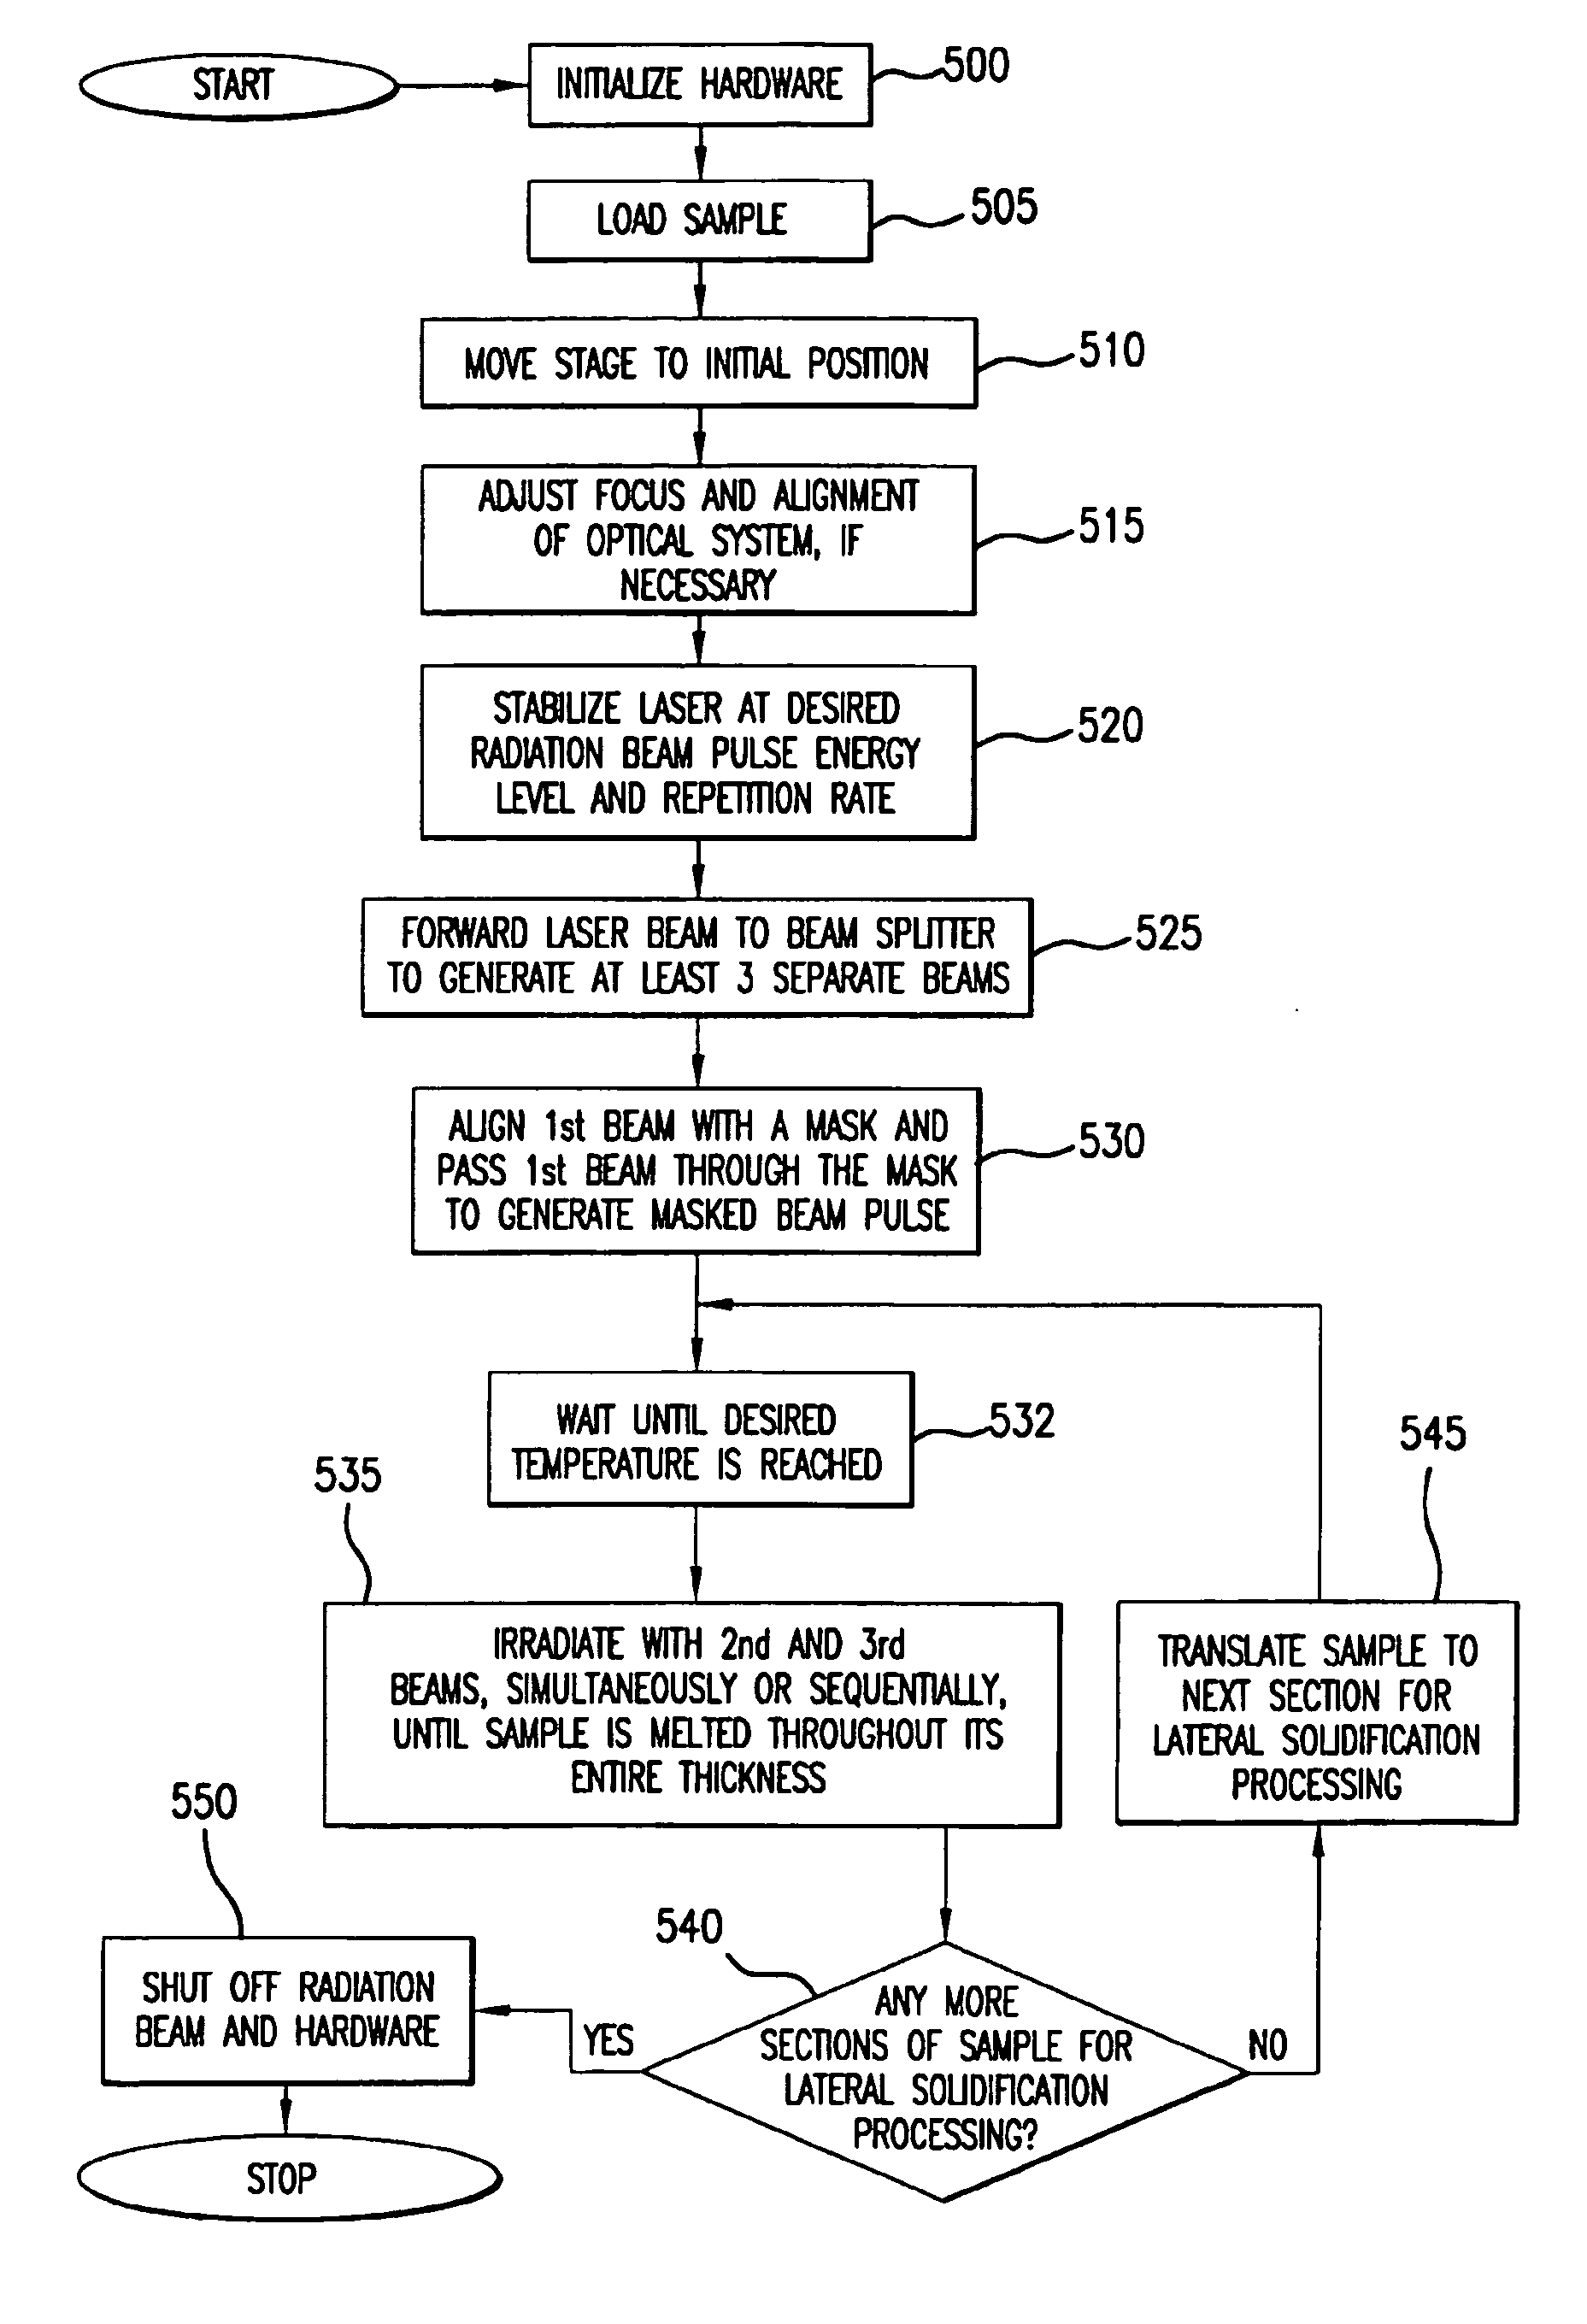 System and process for providing multiple beam sequential lateral solidification